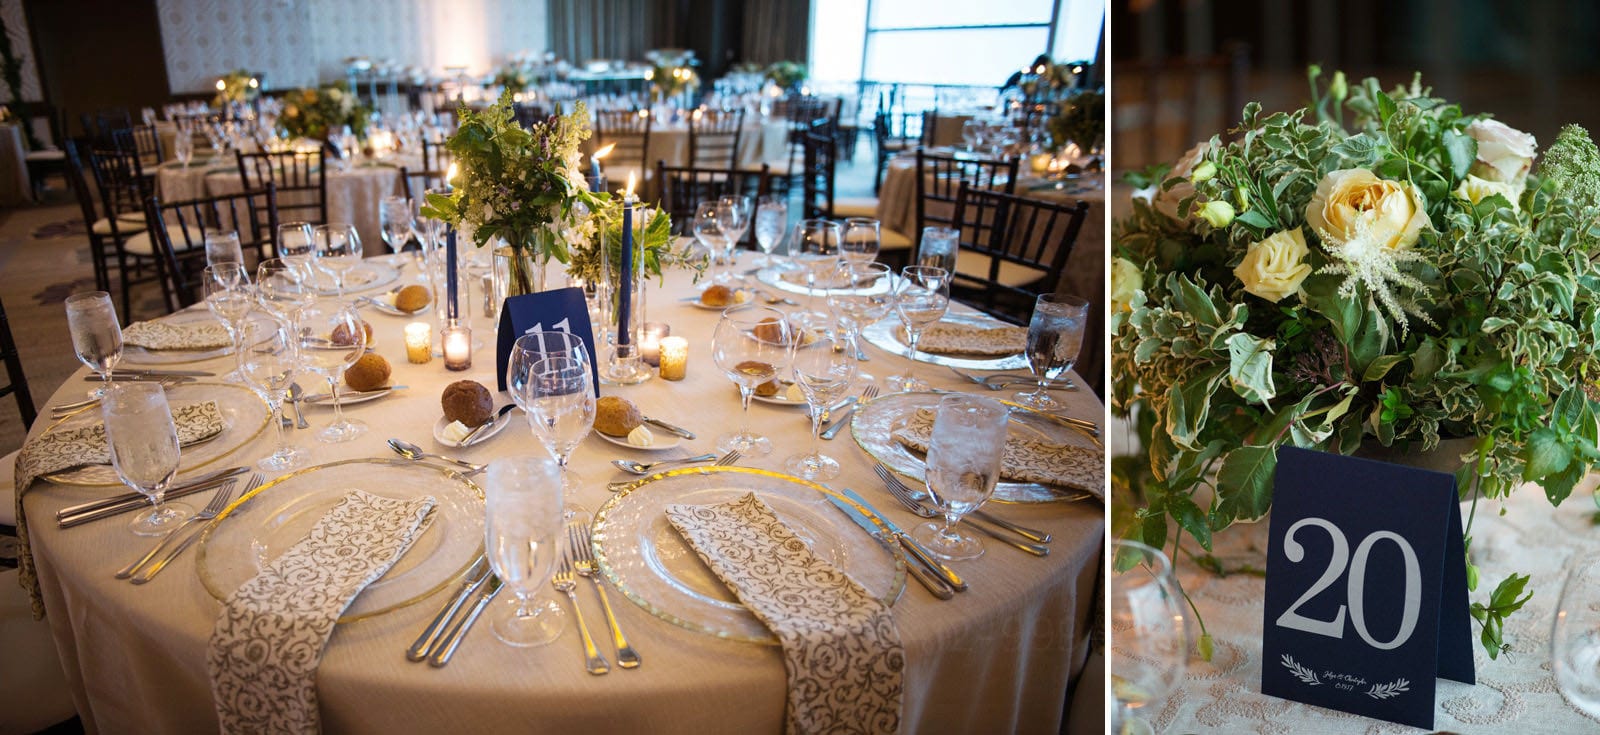 A round table set with ornate dishes and napkins in the foreground of a room set similarly along with roses in the centerpieces Wedding Photography at Fairmont Hotel Pittsburgh.